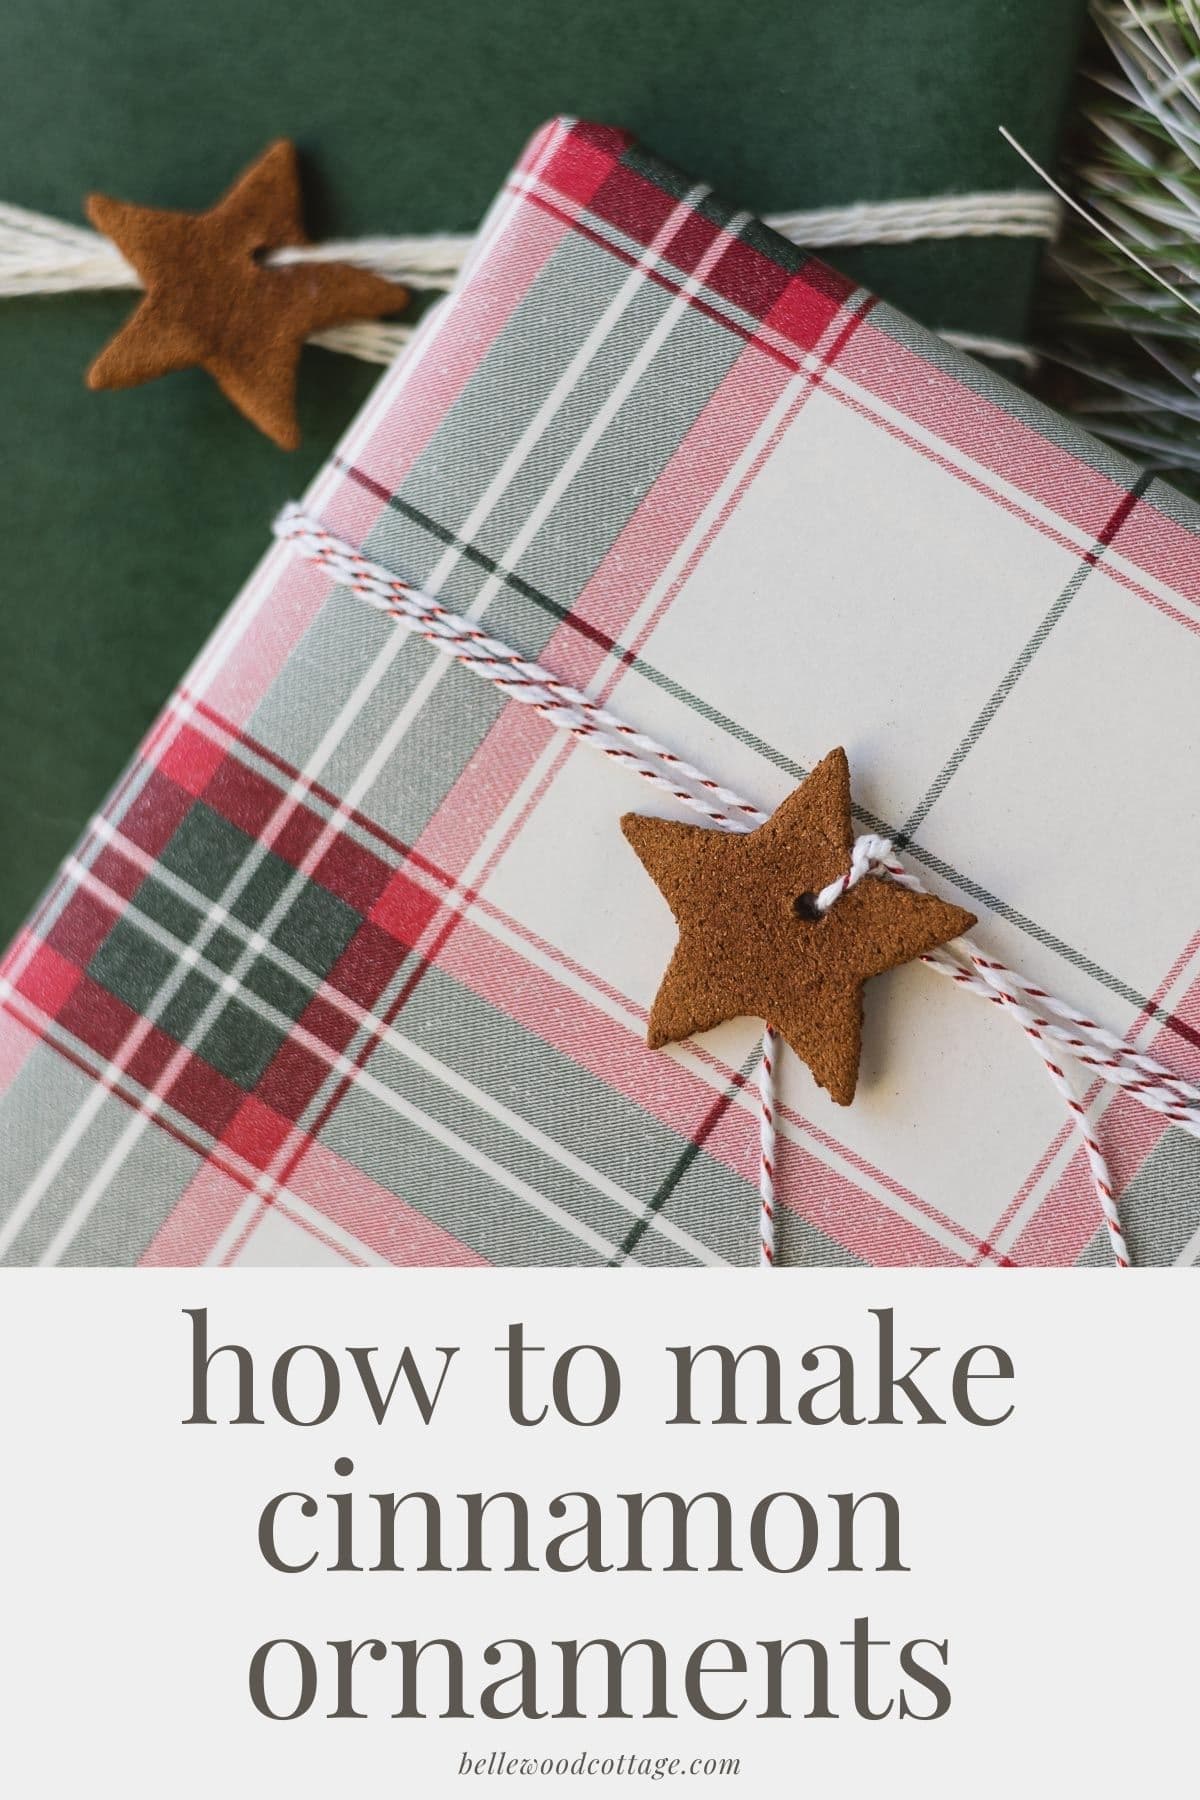 A cinnamon-applesauce star ornament tied onto a package with the words, "how to make cinnamon ornaments."